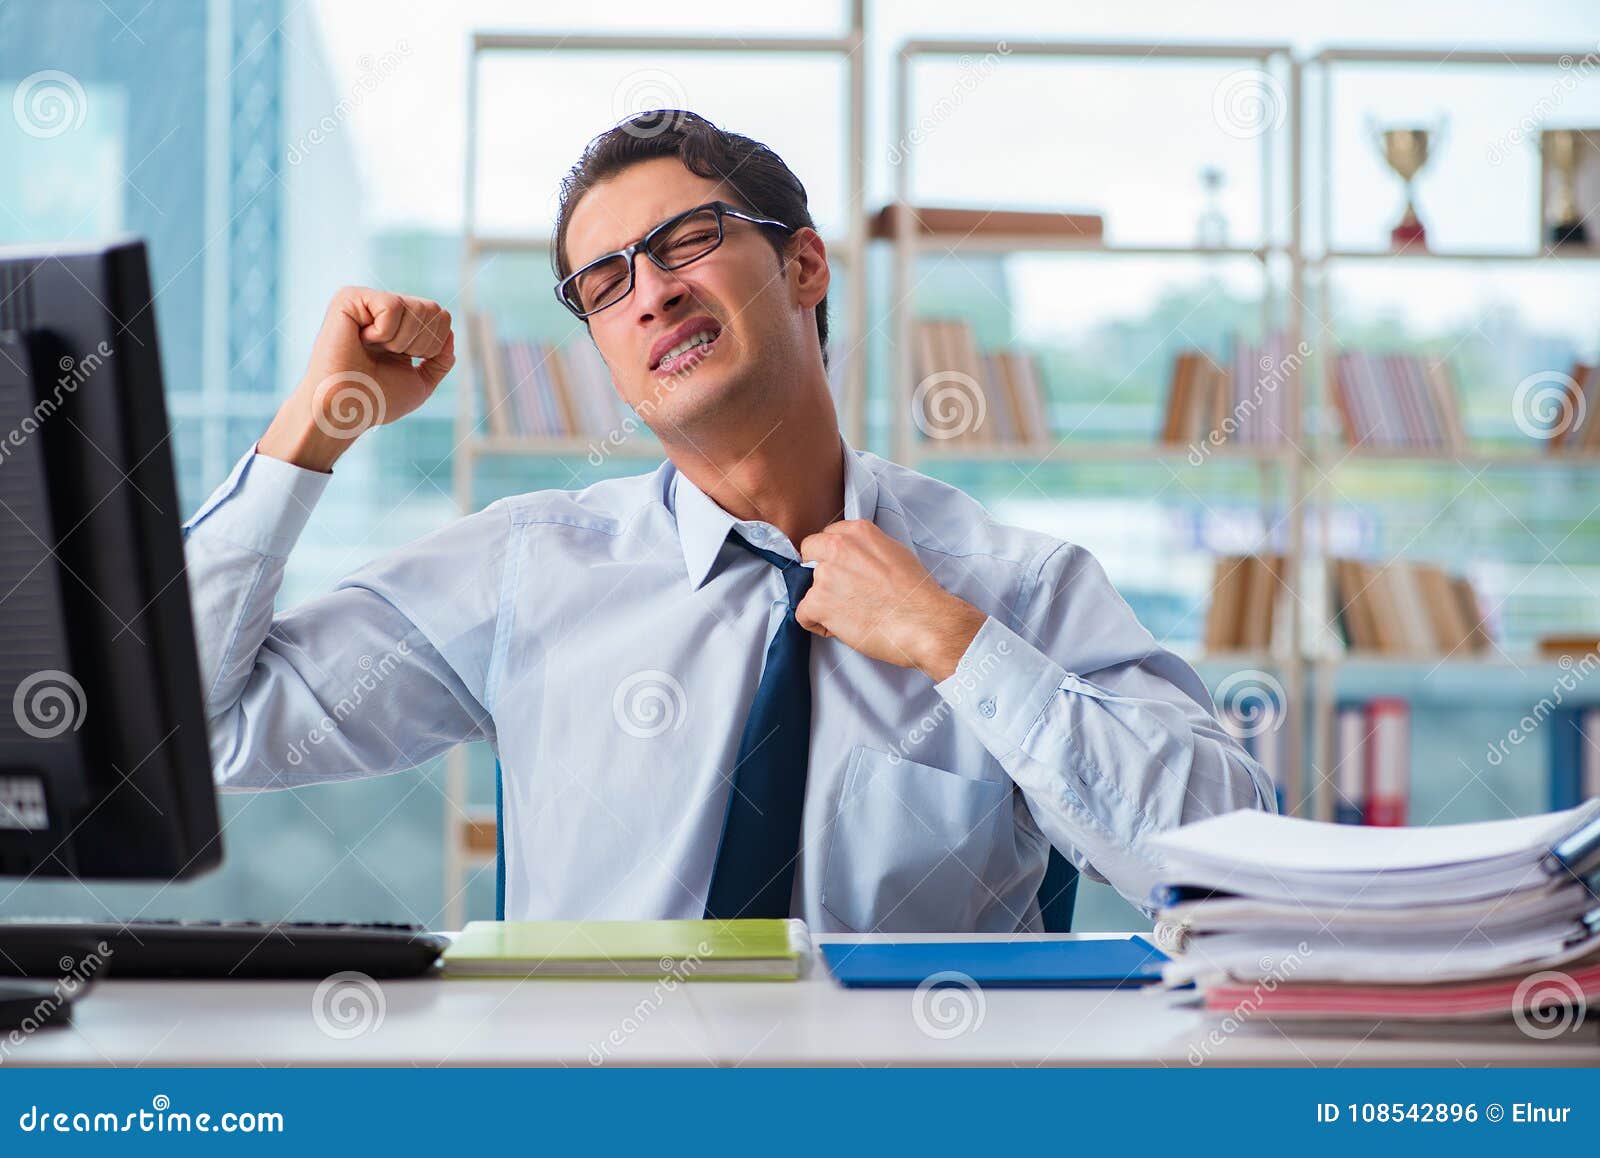 the businessman suffering from excessive armpit sweating